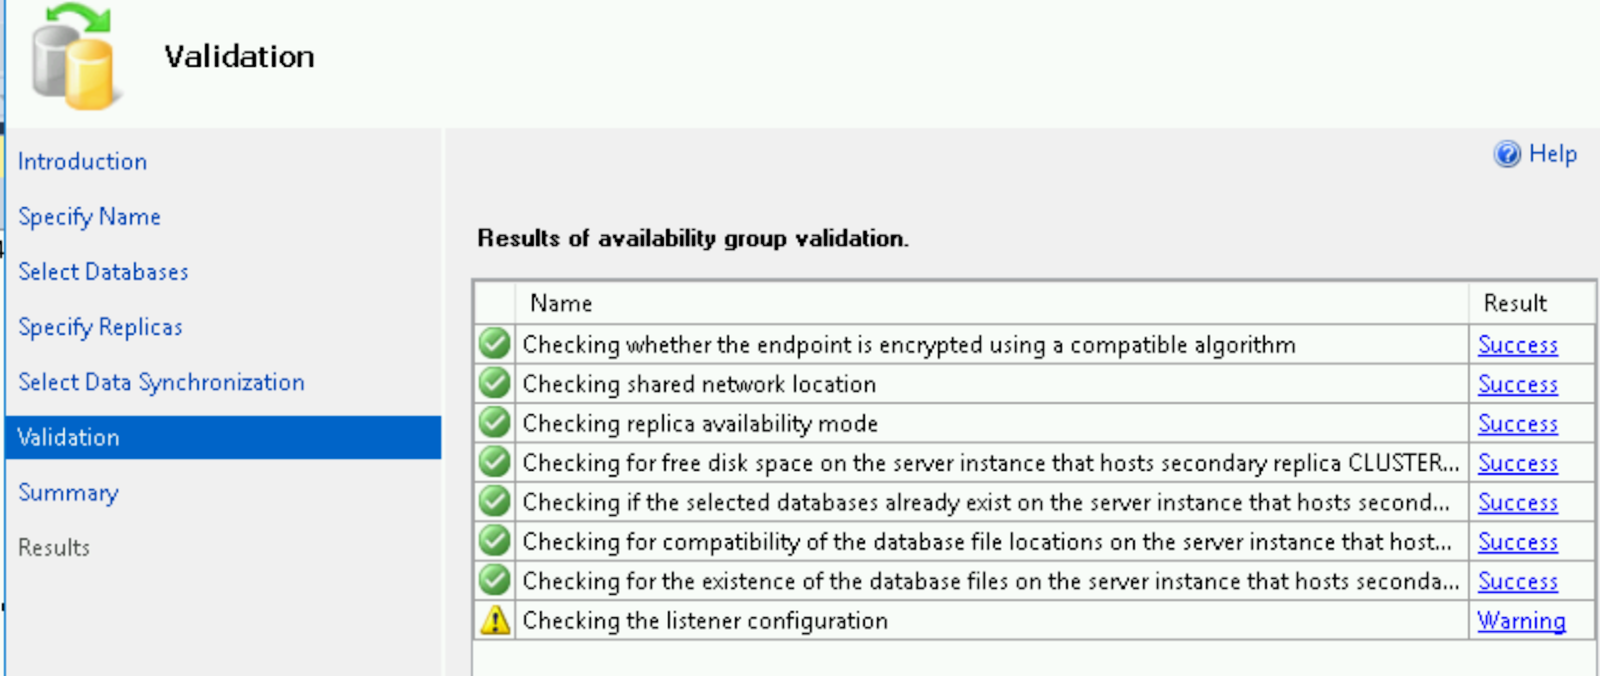 The Validation page, with the warning 'Checking the listened configuration'.